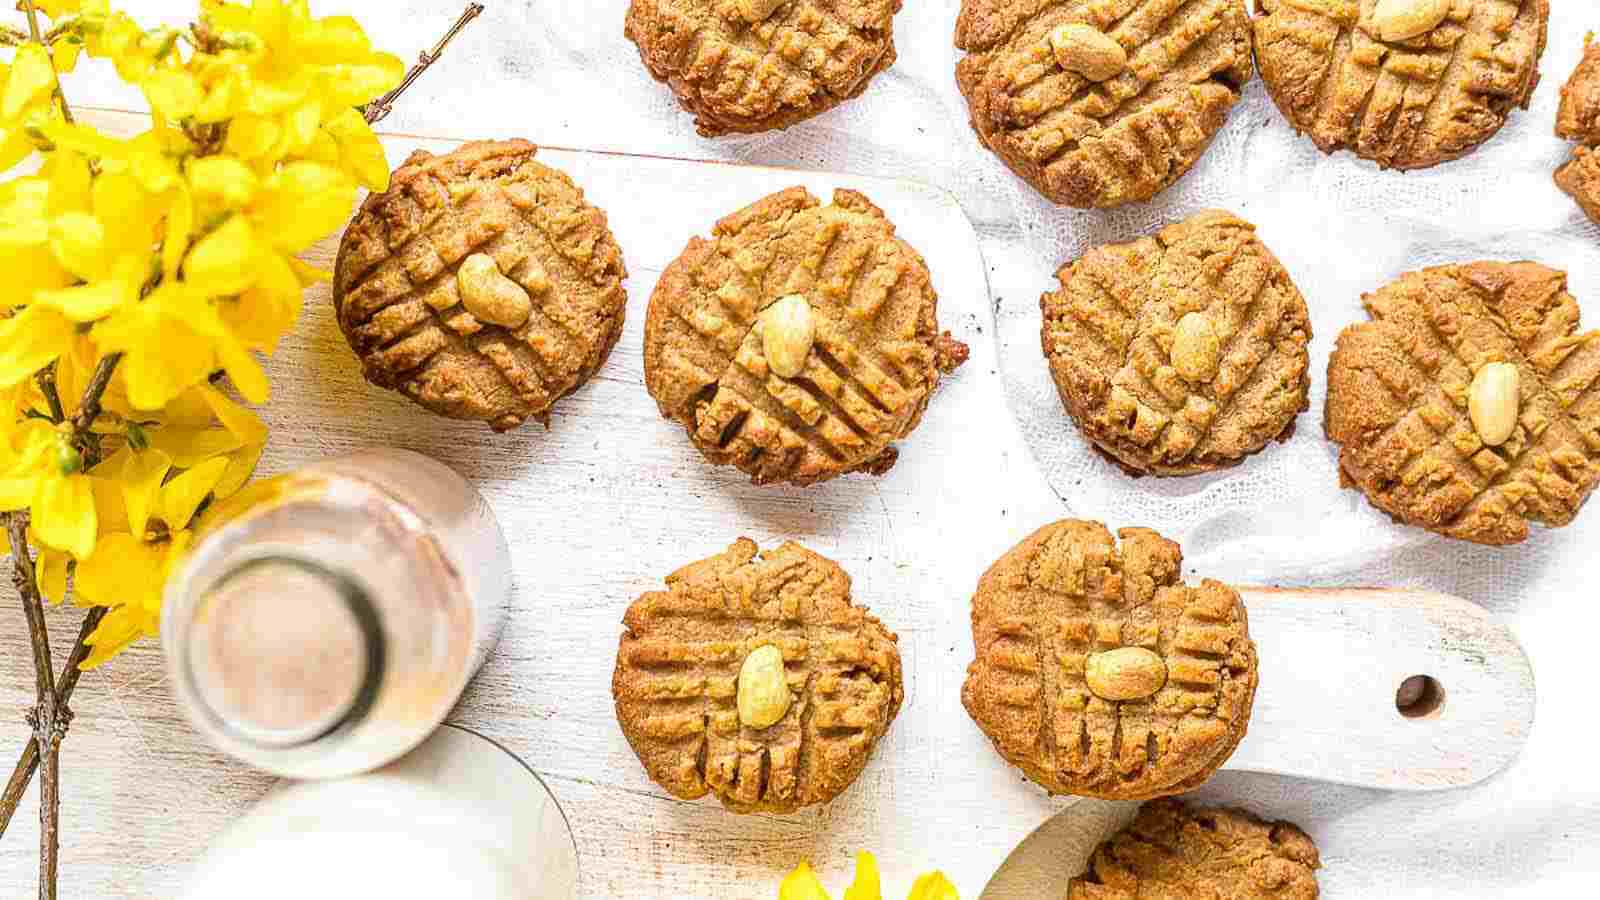 Peanut Butter Keto Cookies layered on a white surface with yellow flowers on the side.